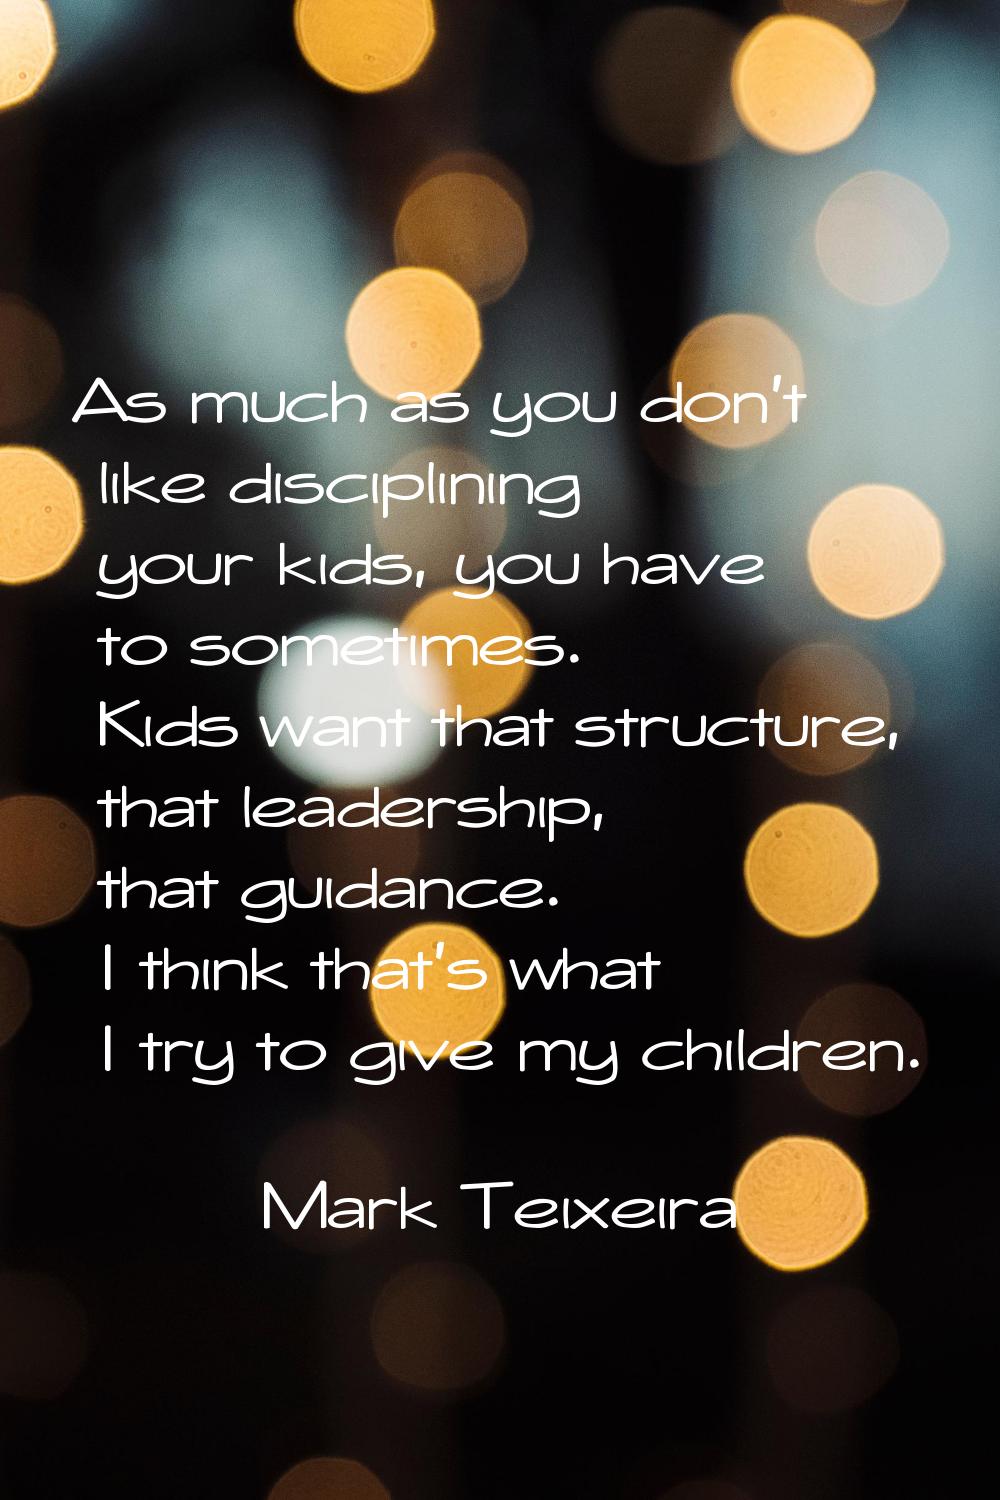 As much as you don't like disciplining your kids, you have to sometimes. Kids want that structure, 